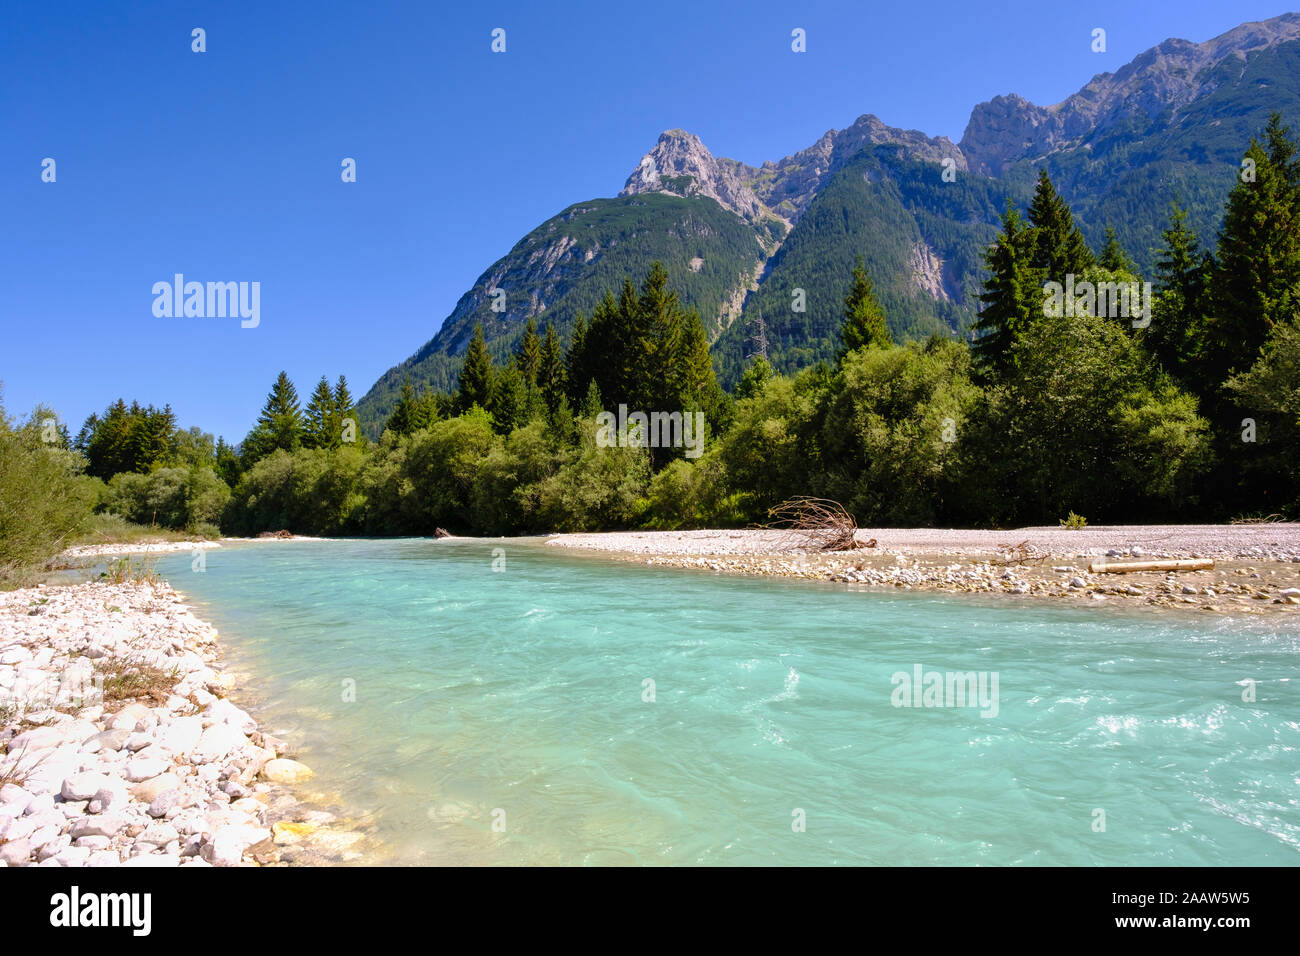 Scenic view of Isar River with Karwendel mountains in background against clear blue sky, Tyrol, Austria Stock Photo